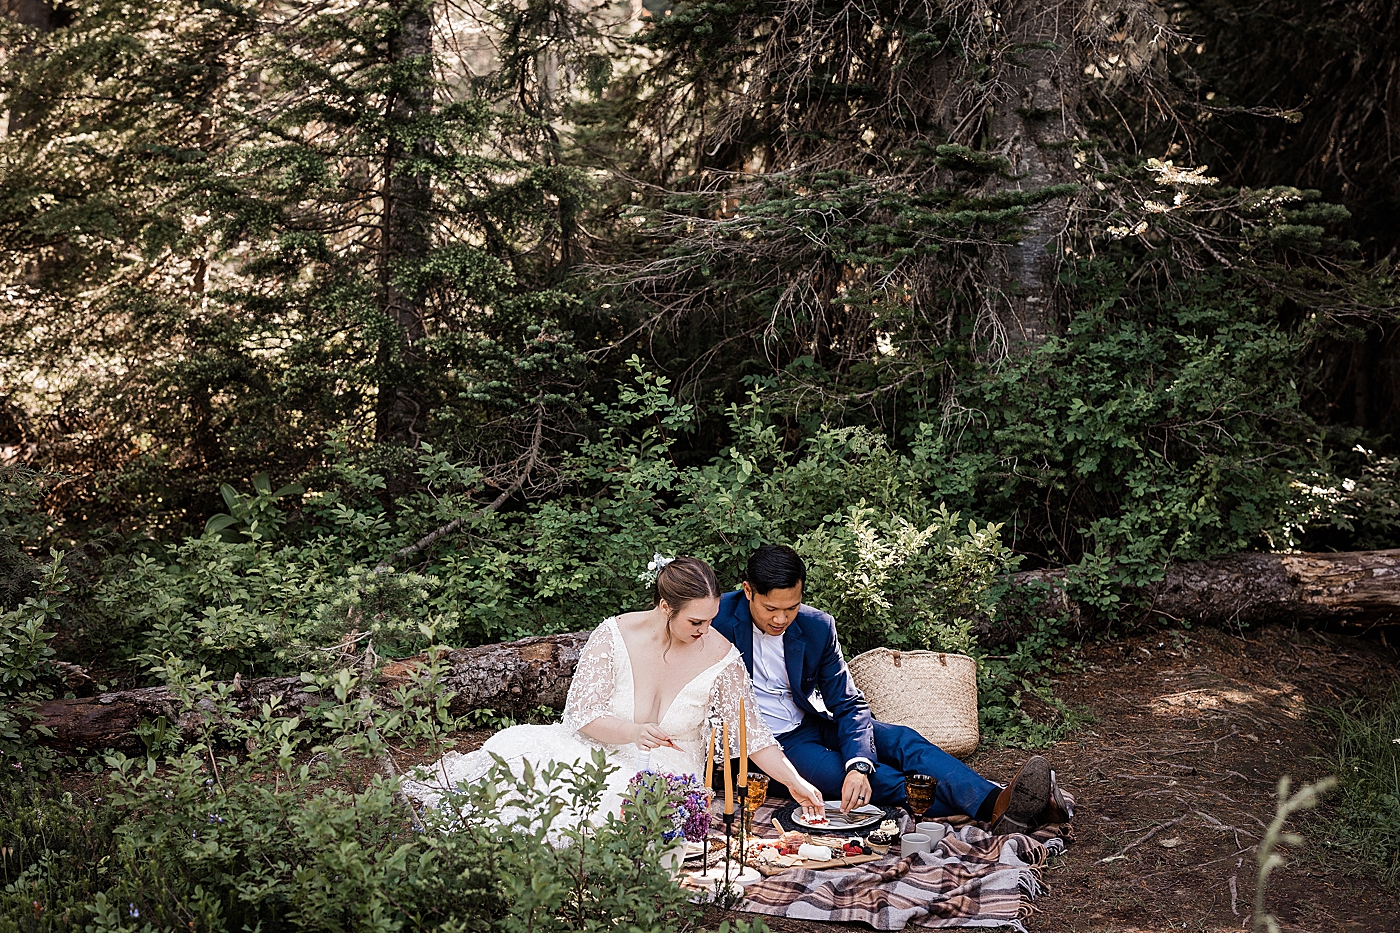 Picnic in the forest at Mt. Rainier during elopement. Photo by Megan Montalvo Photography.